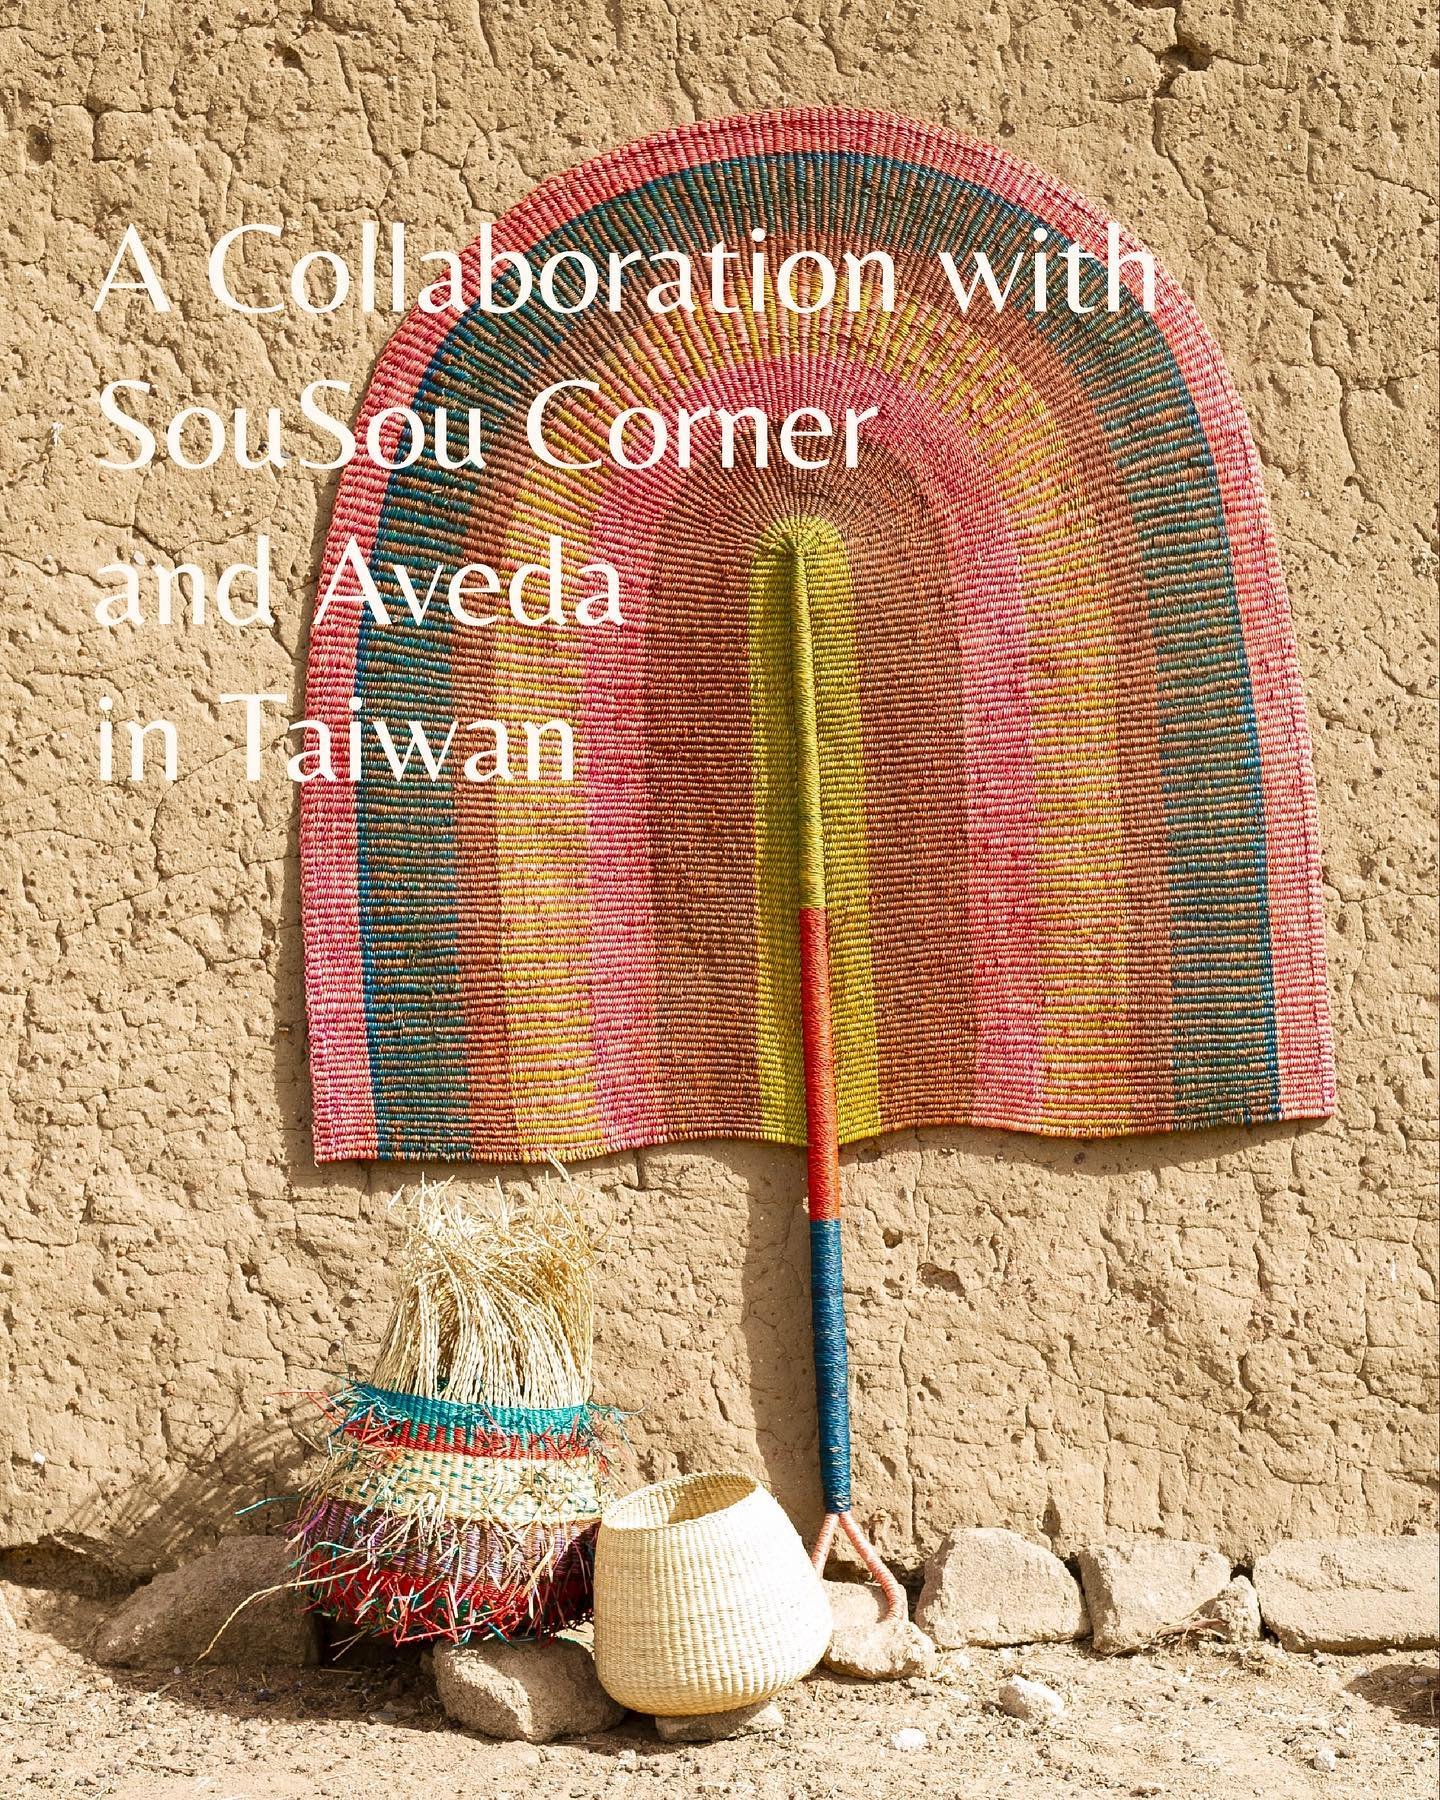 Our collaboration with SouSou Corner still leaves us in awe. Designed by our team and brought to life by the skilled hands of our artisans partners.

The process was poetry in motion &ndash; a delicate dance of tradition and innovation, that not only